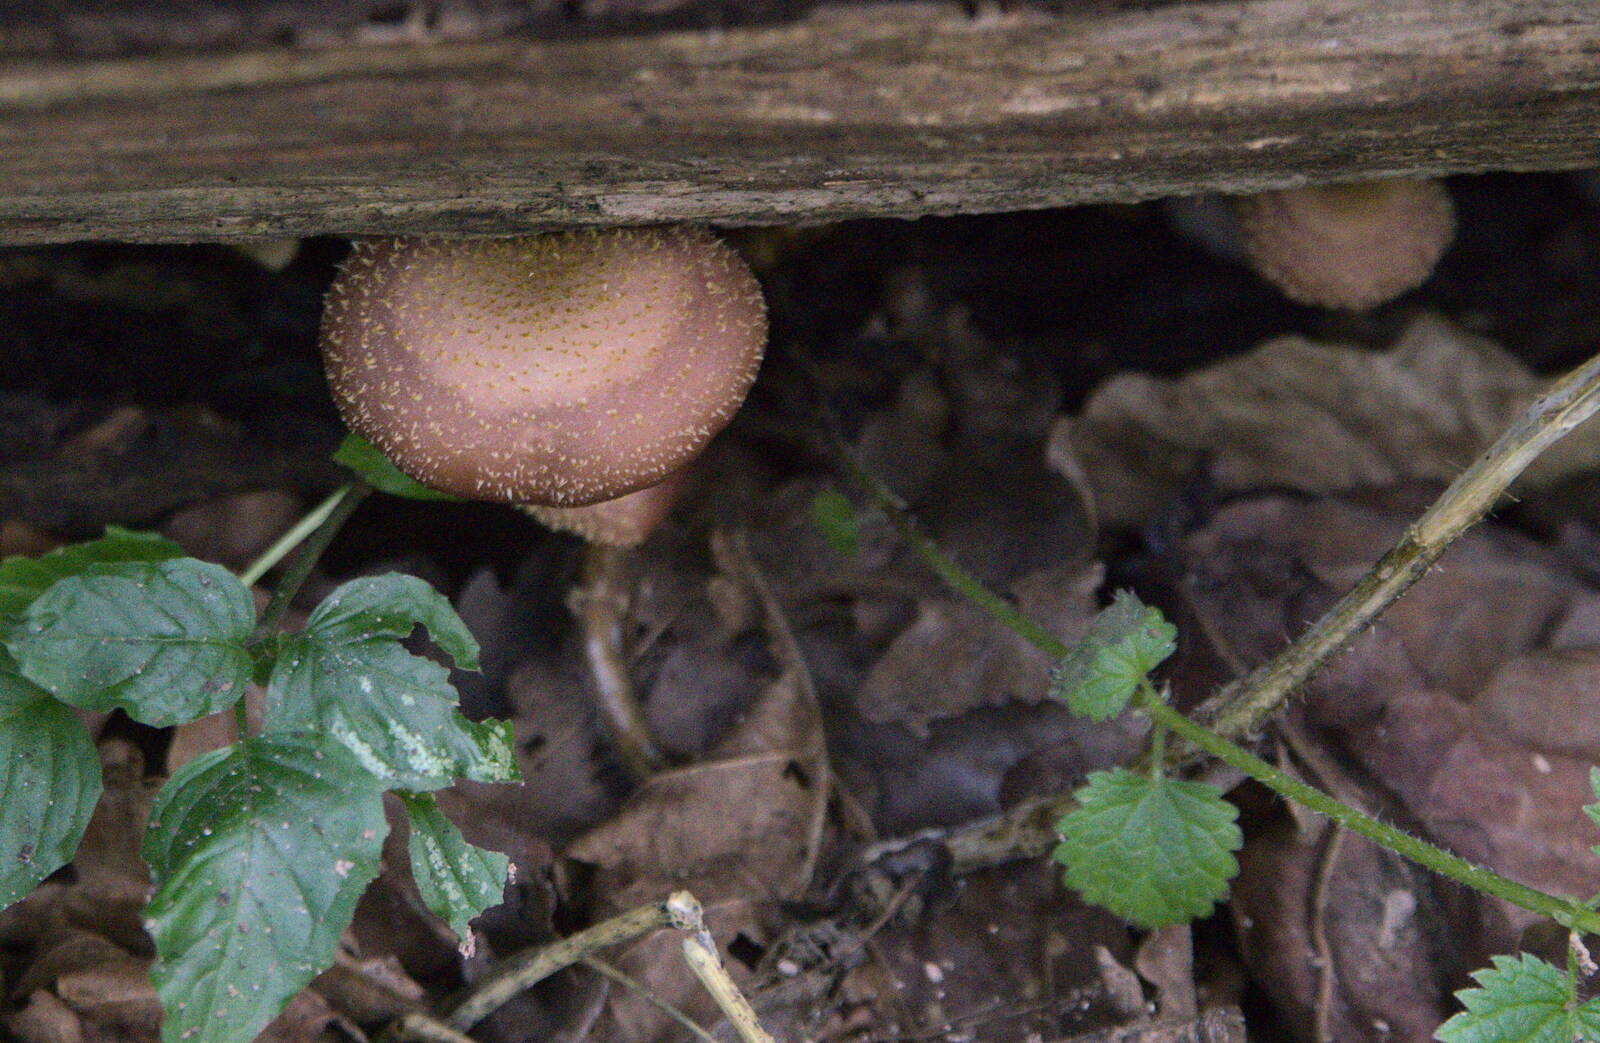 A mushroom with dimples hides away from The Mushrooms of Thornham Estate, Thornham, Suffolk - 4th October 2015